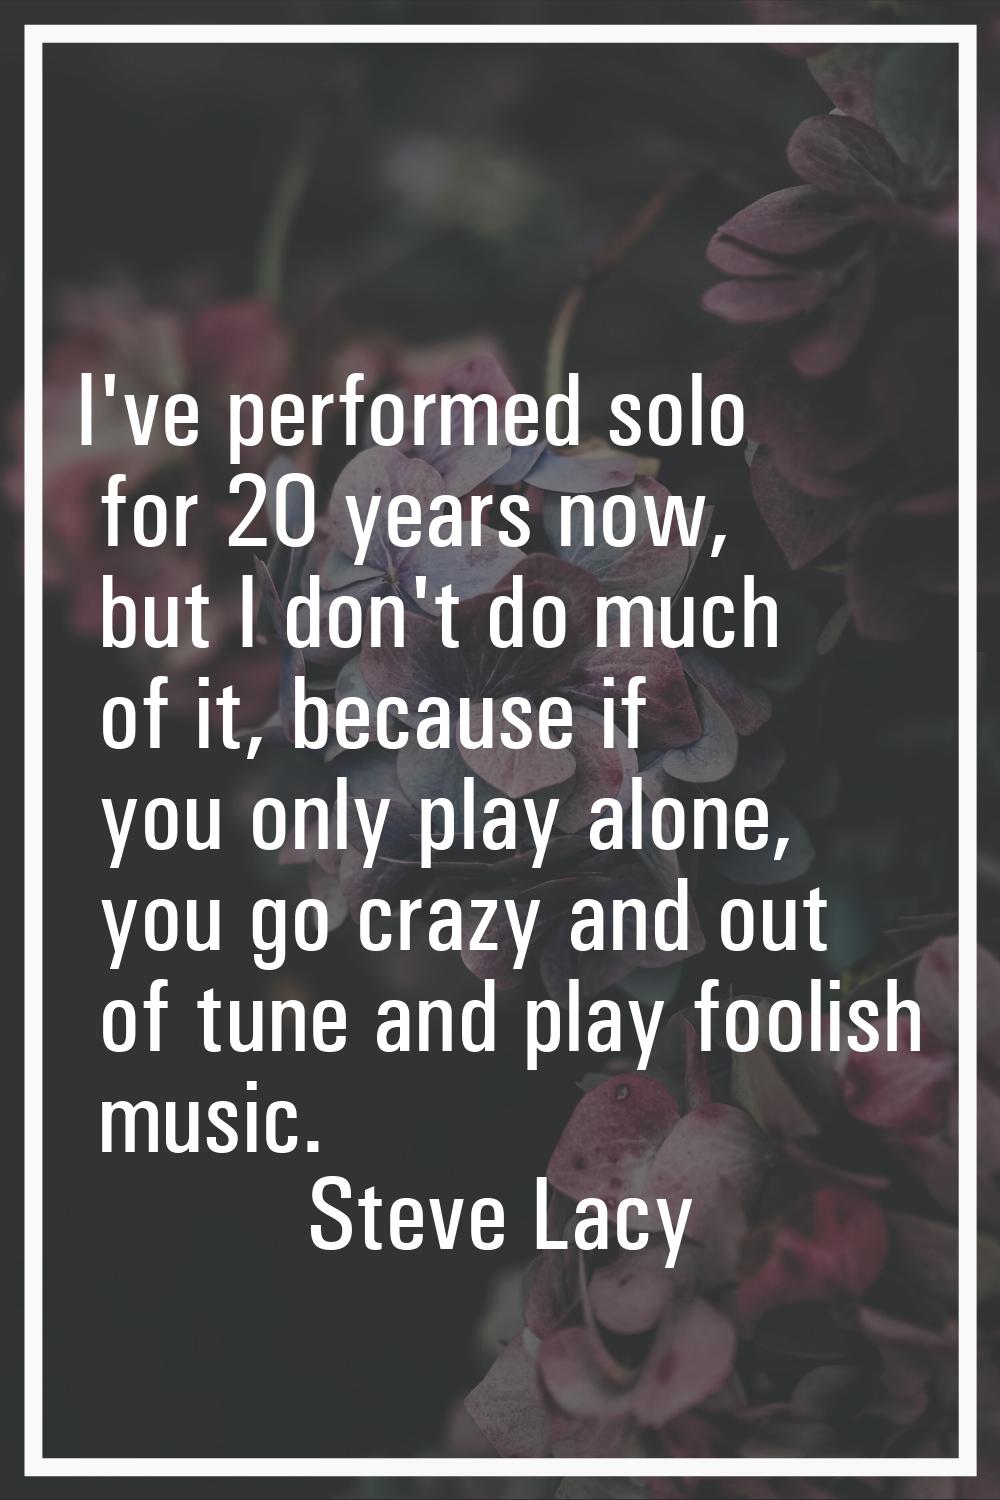 I've performed solo for 20 years now, but I don't do much of it, because if you only play alone, yo